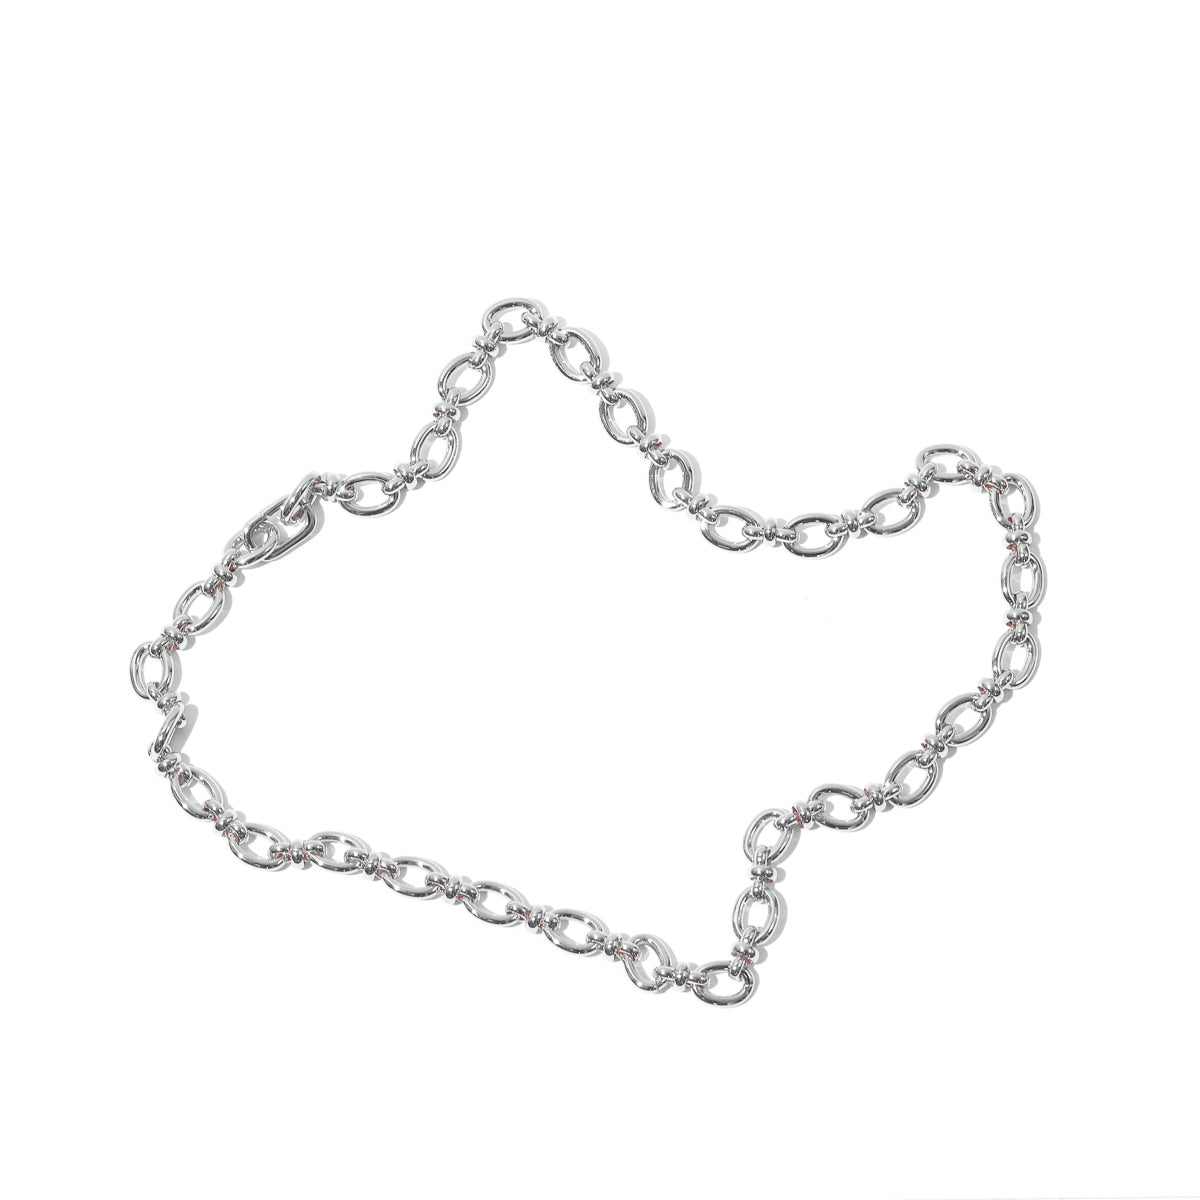 Open Link Chain Necklace in Silver flay lay